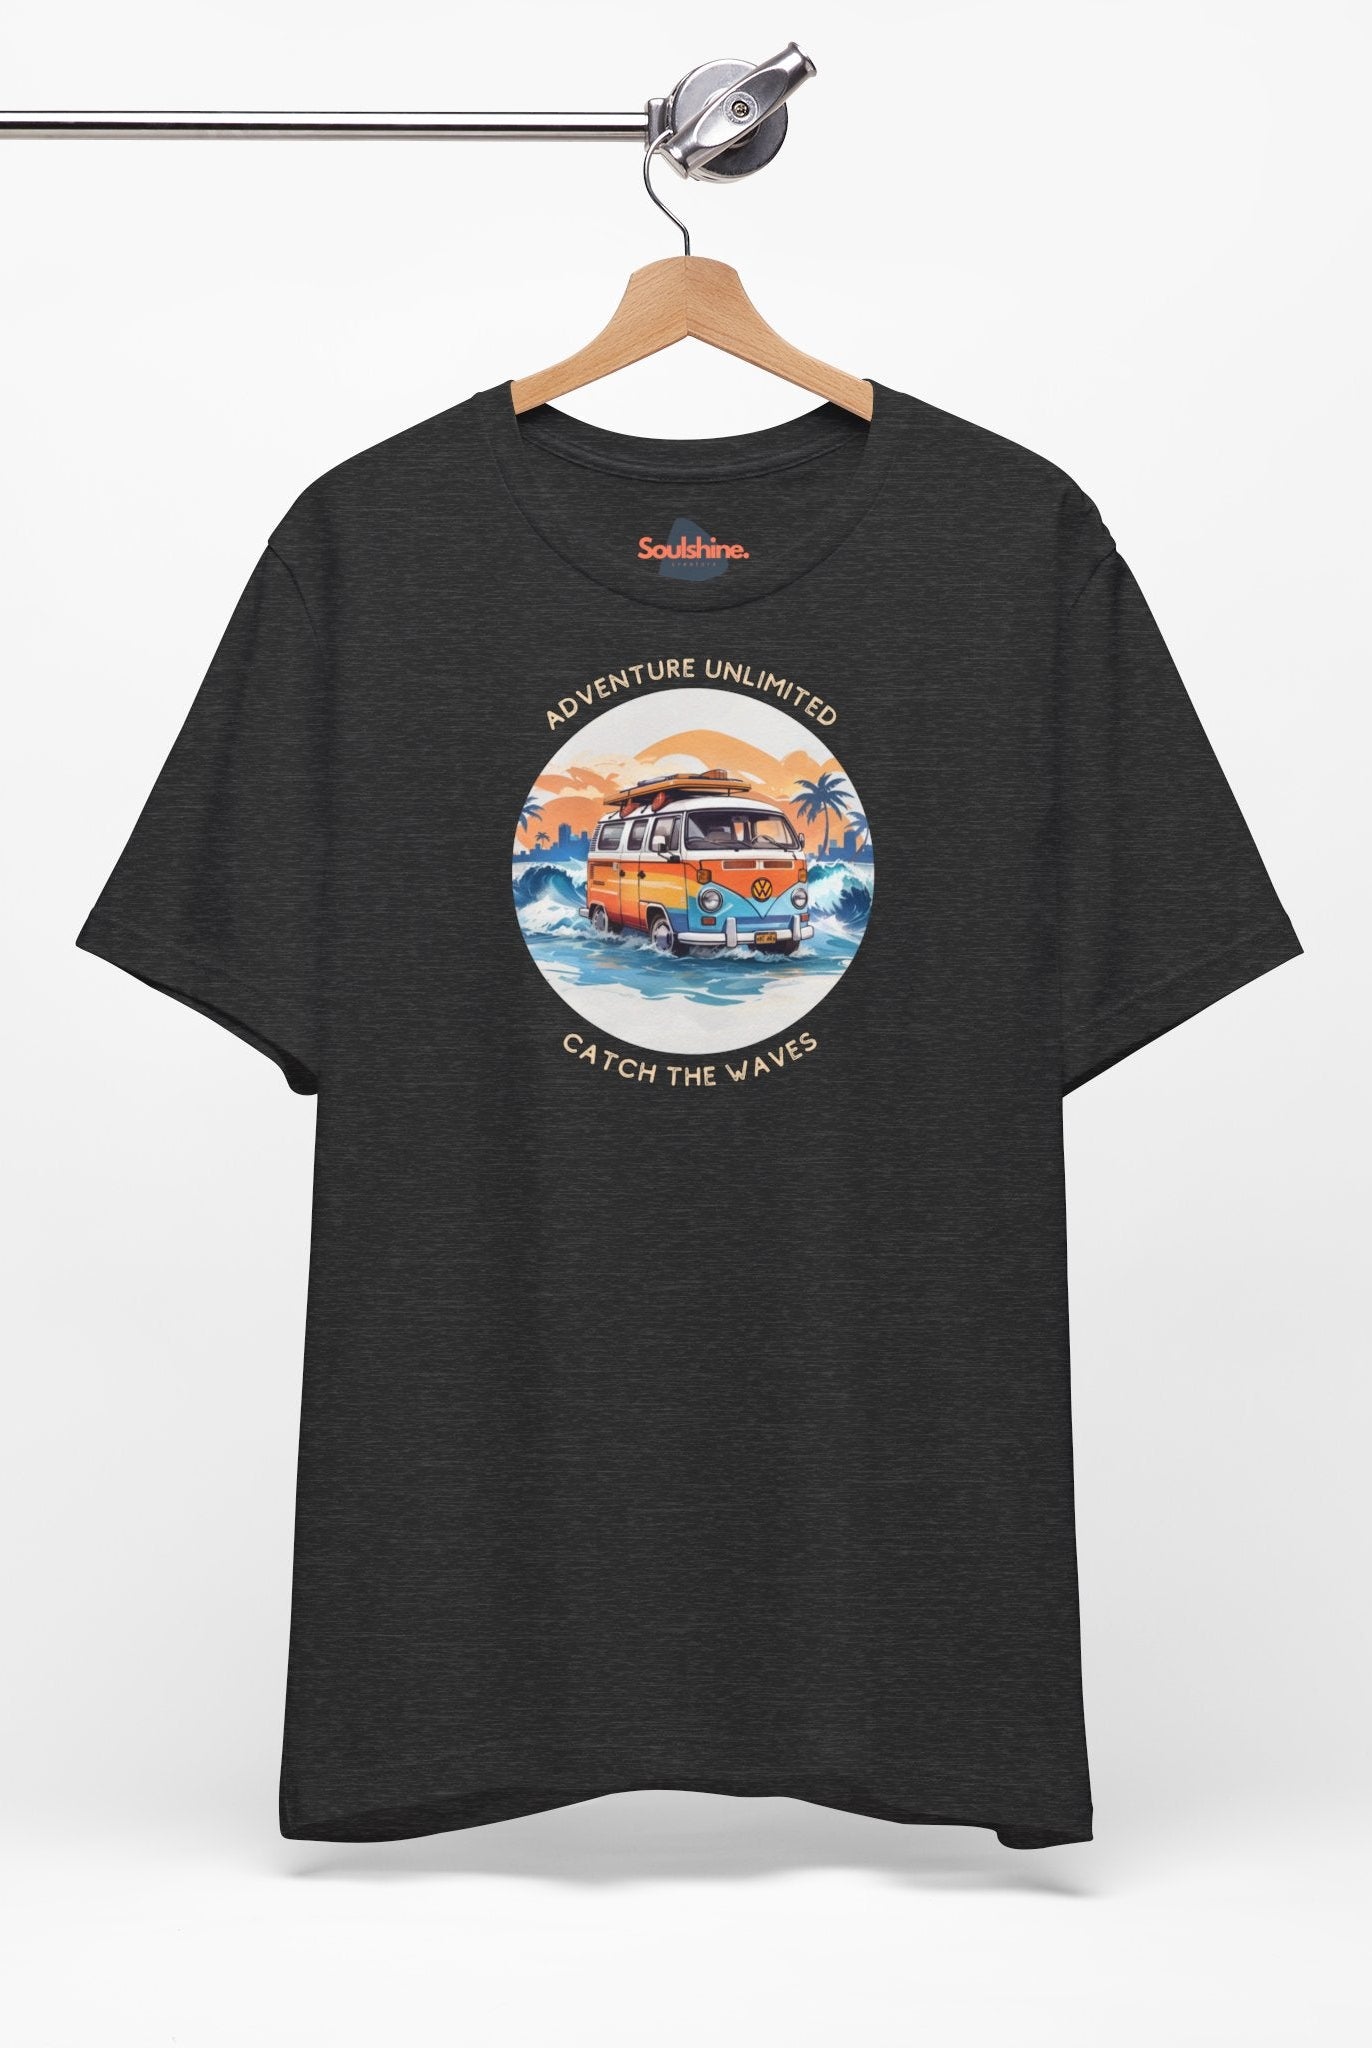 Adventure Unlimited Surfing T-Shirt printed in DTG, black tee with van on the beach